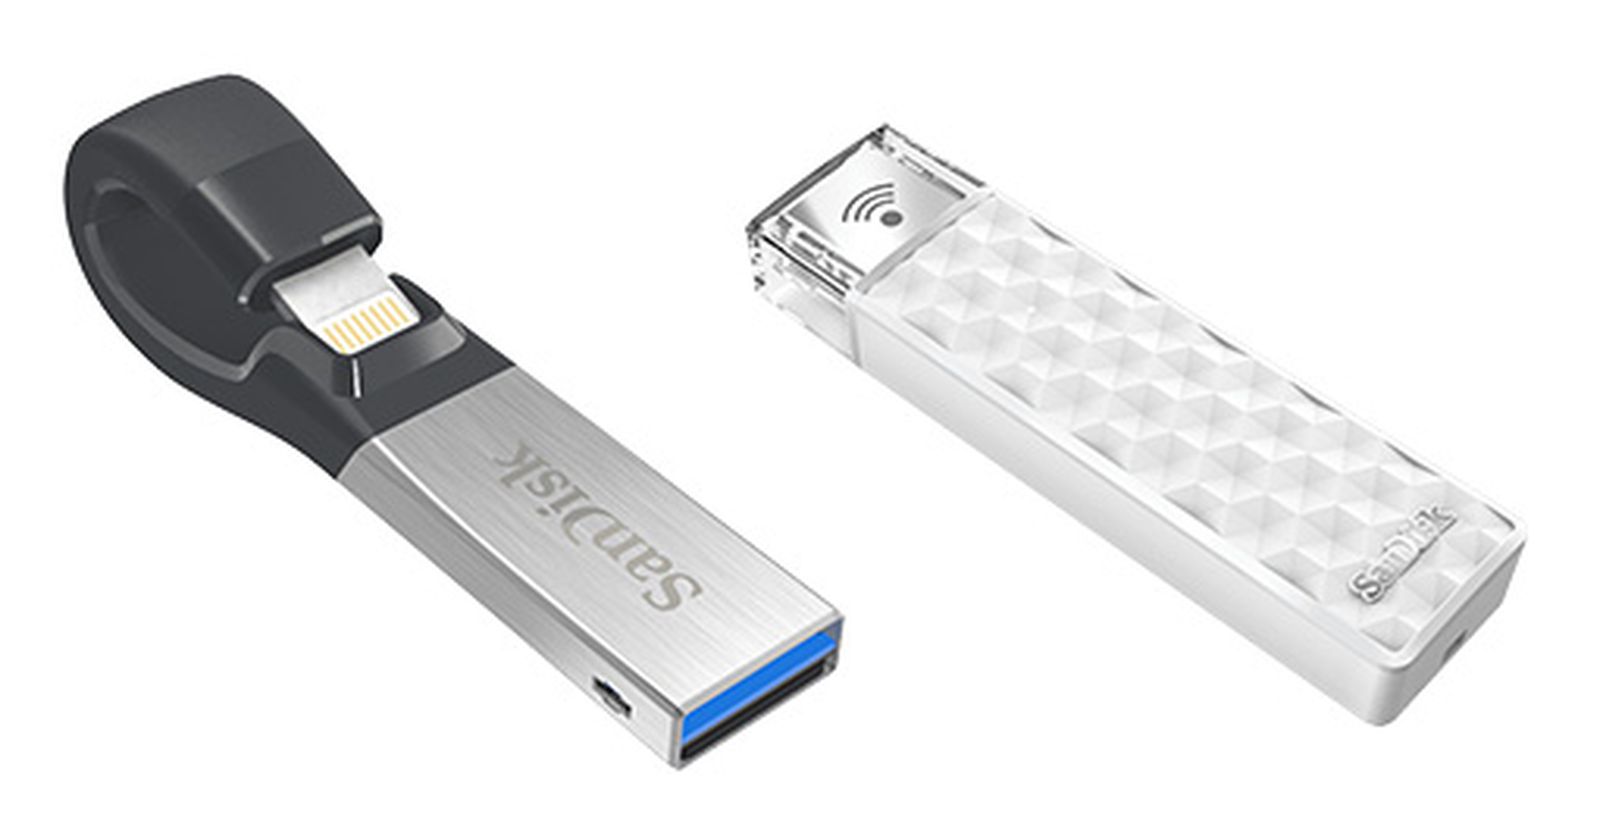 Appel til at være attraktiv skab Dyster SanDisk Launches 256GB Flash Drive and Wireless Stick for iPhone and iPad -  MacRumors